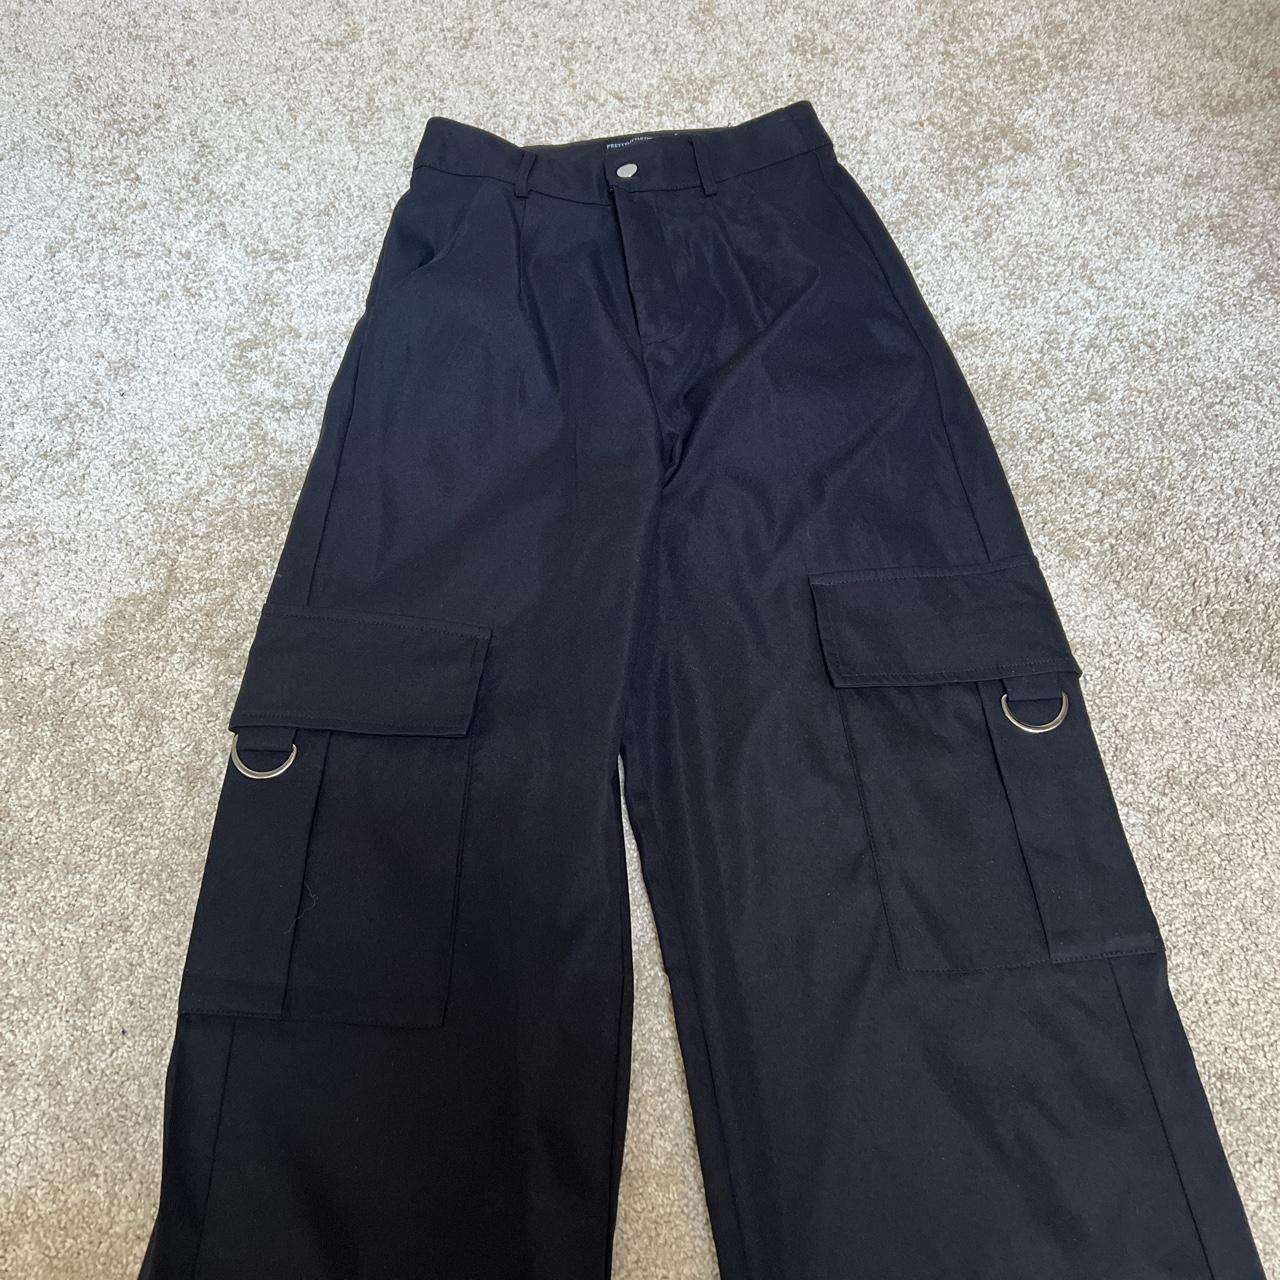 Black wide leg cargos from PLT Size 6 I have a... - Depop